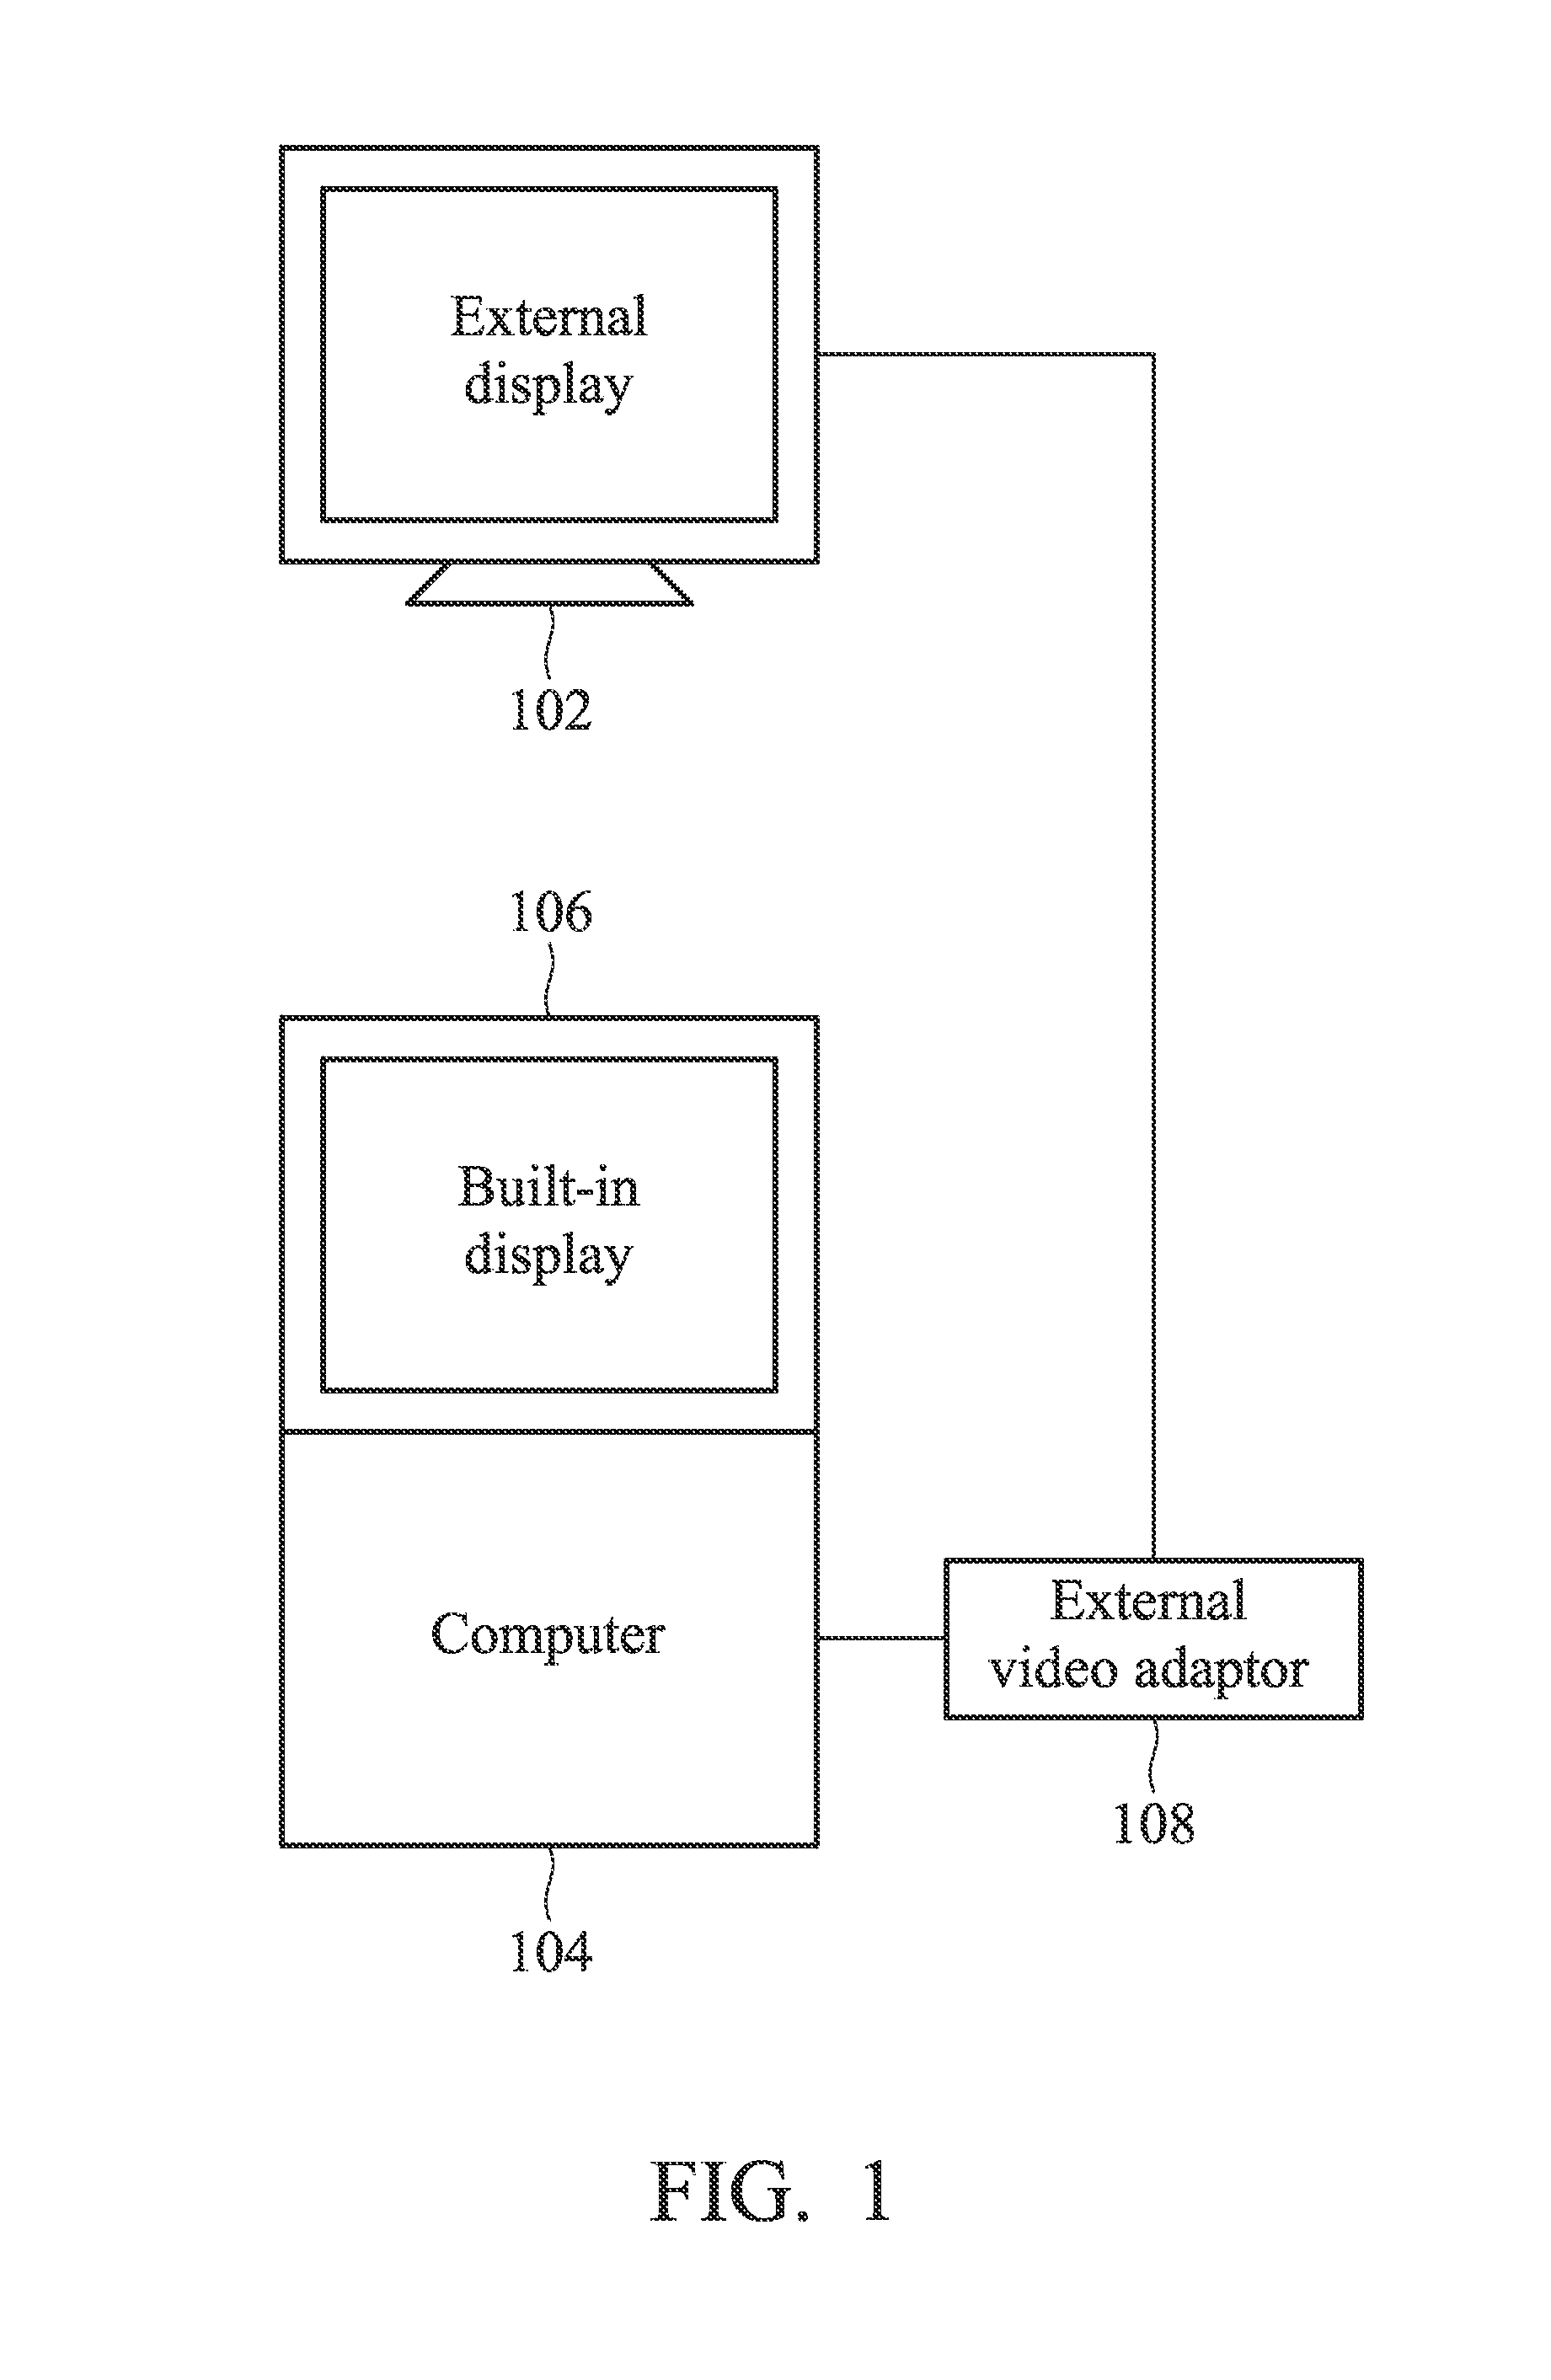 Image processing apparatuses and external image appratus